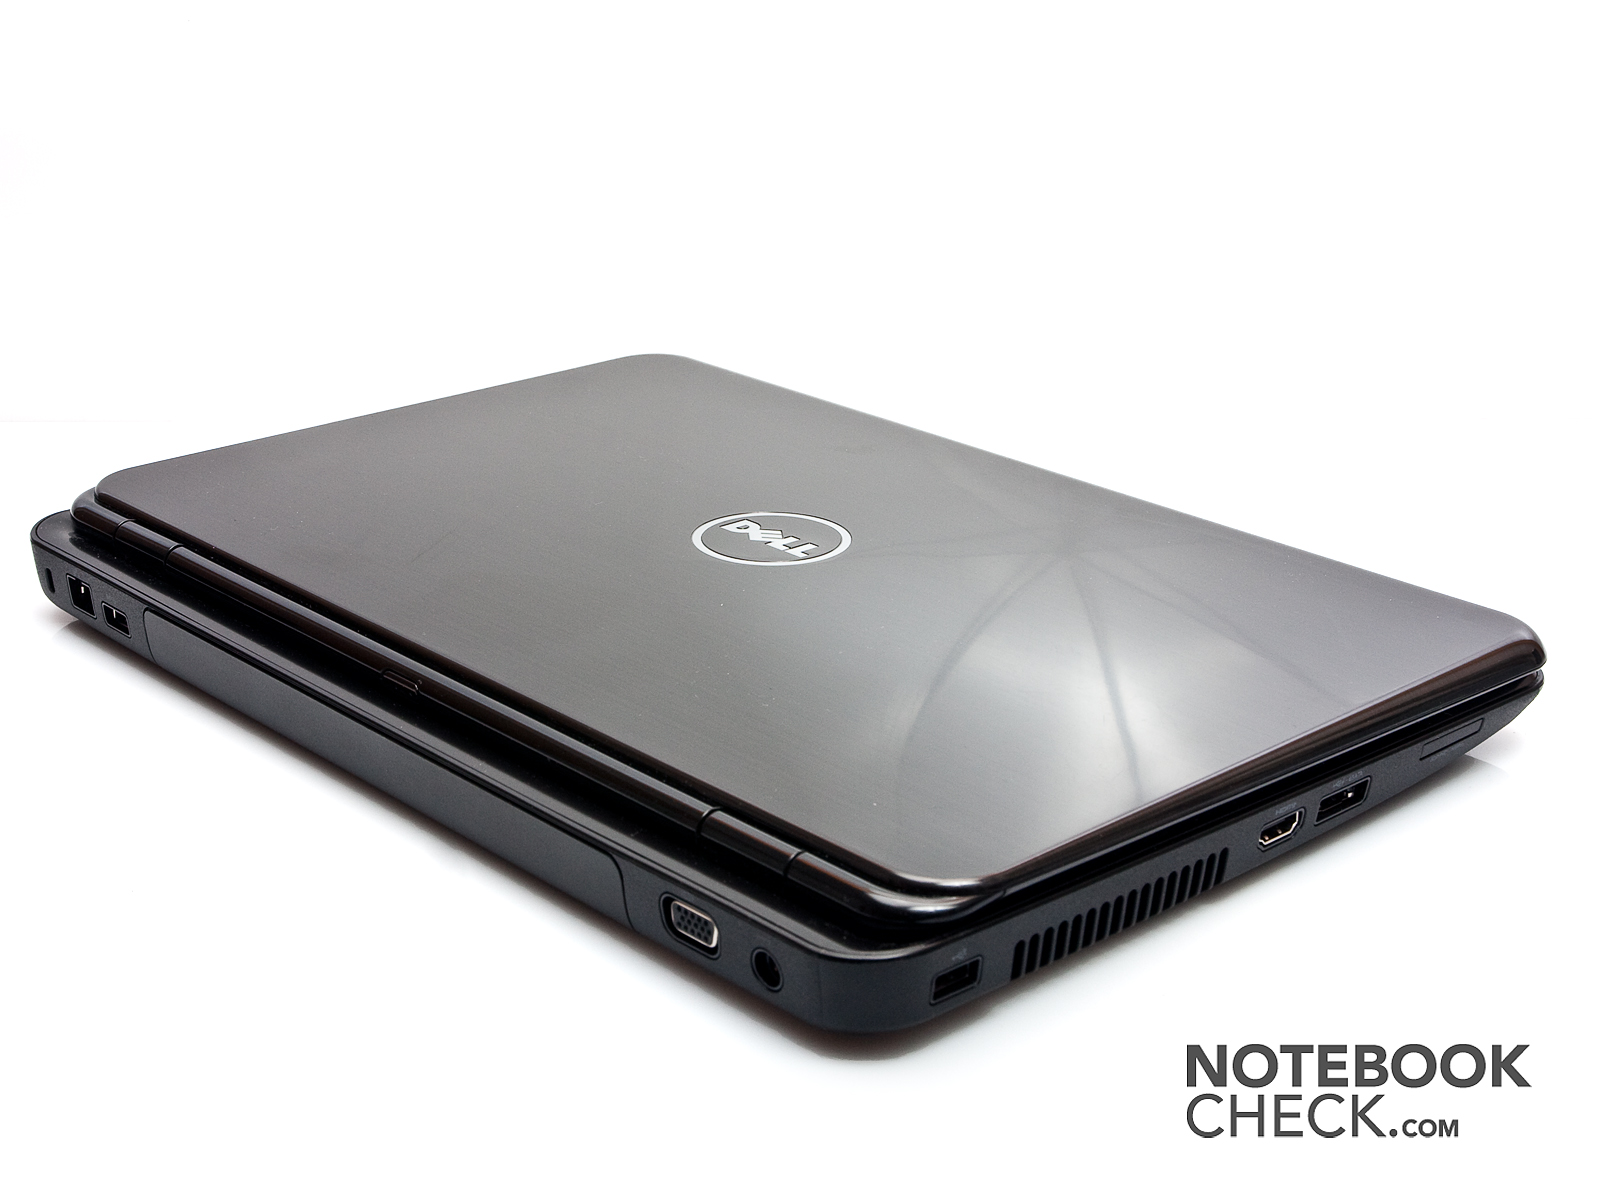 dell inspiron n5110 bios update without battery